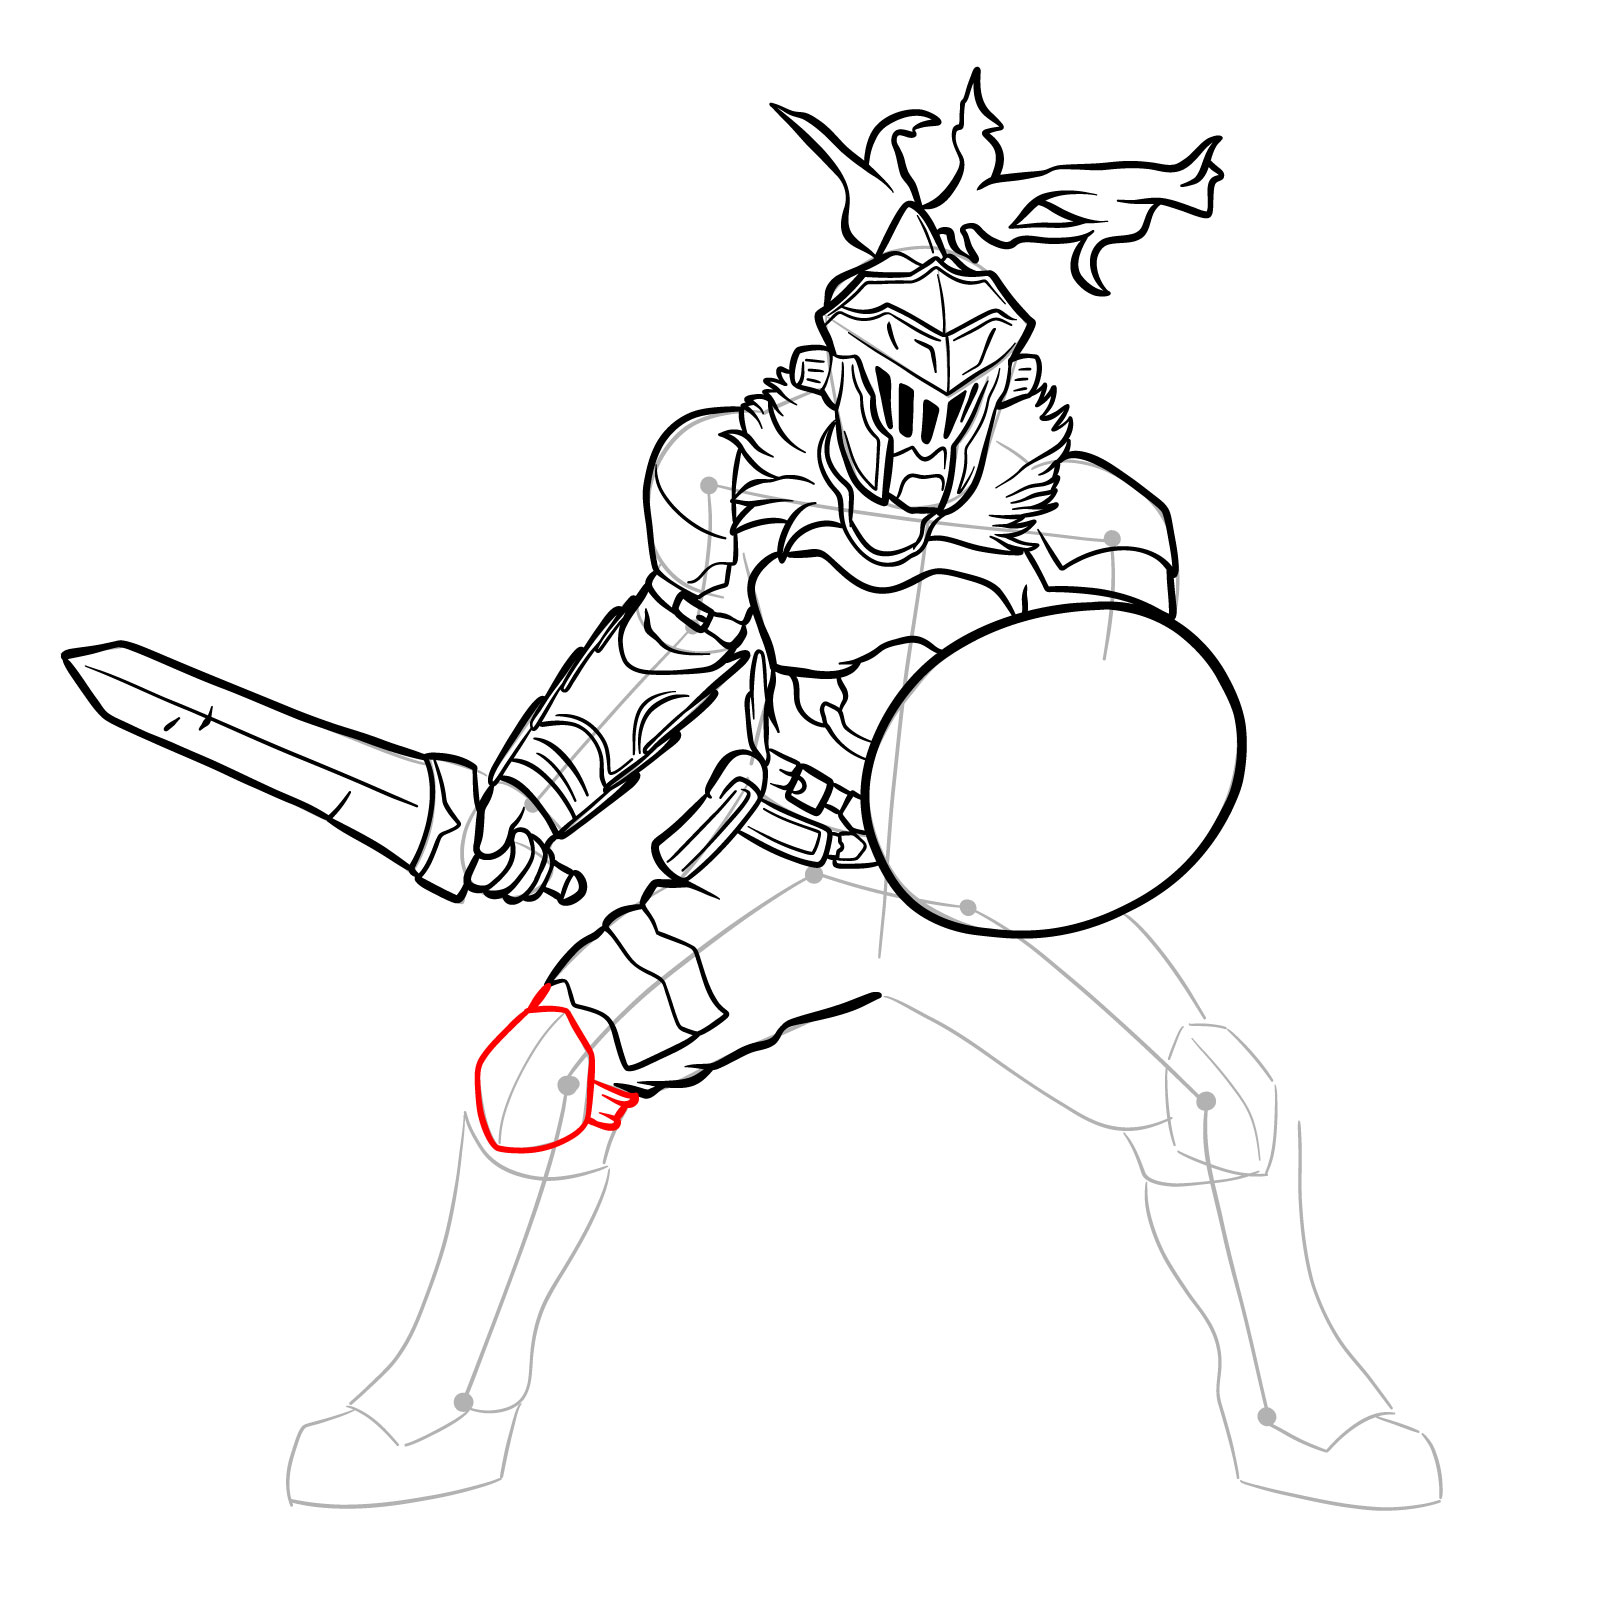 How to Draw Goblin Slayer in battle stance - step 28